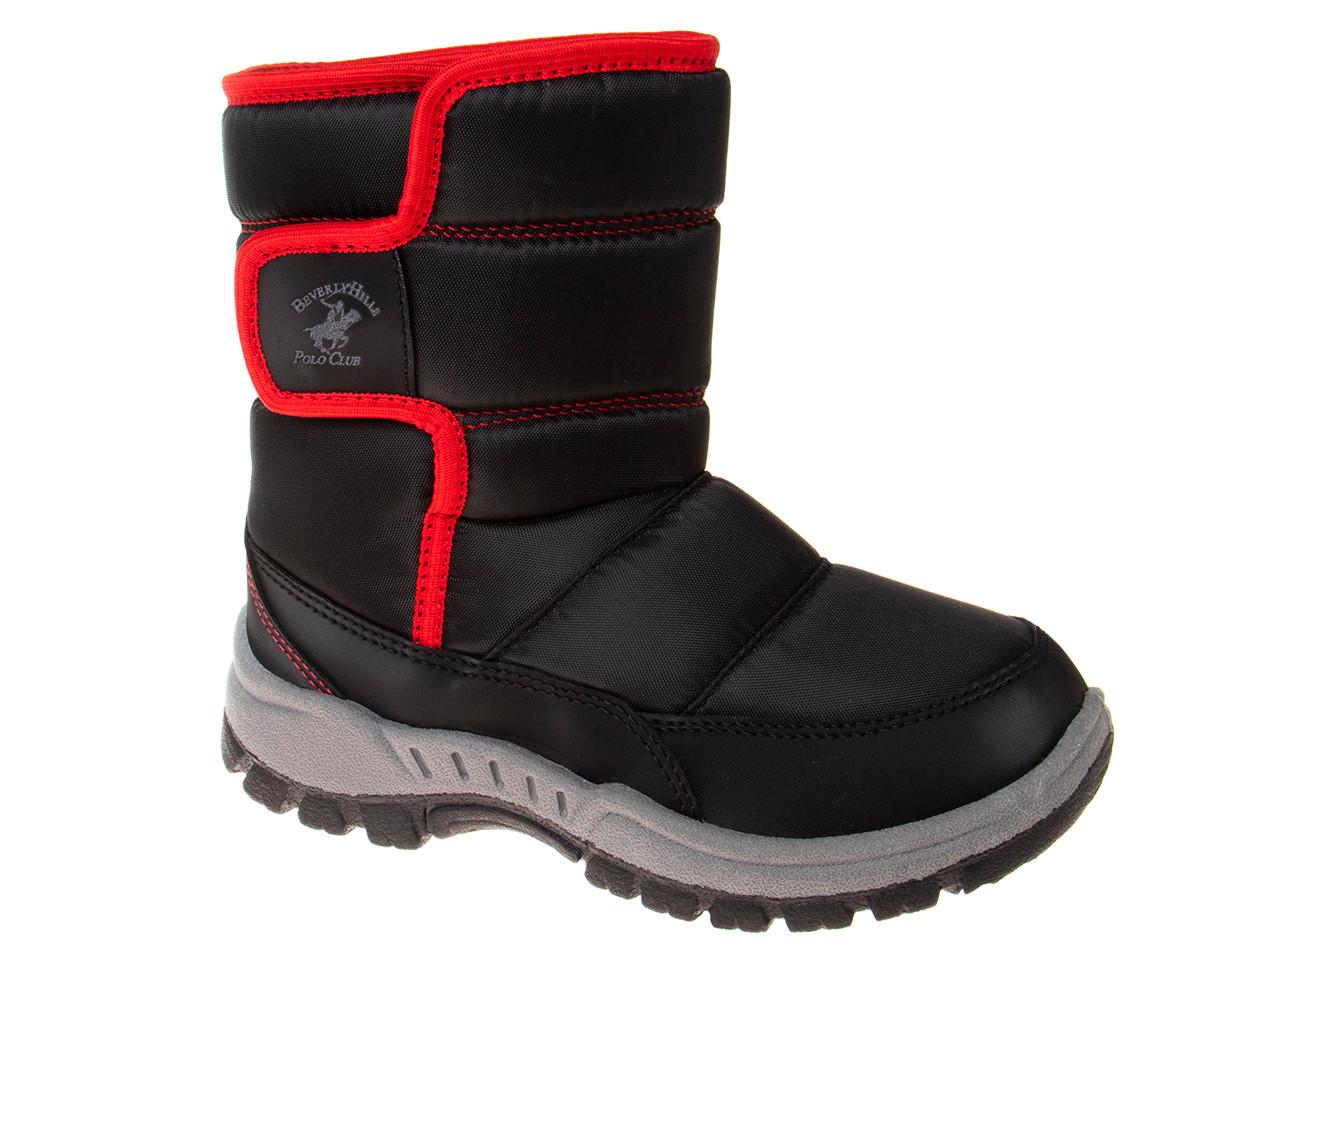 Boys' Beverly Hills Polo Club Toddler Sitka Steps Winter Boots